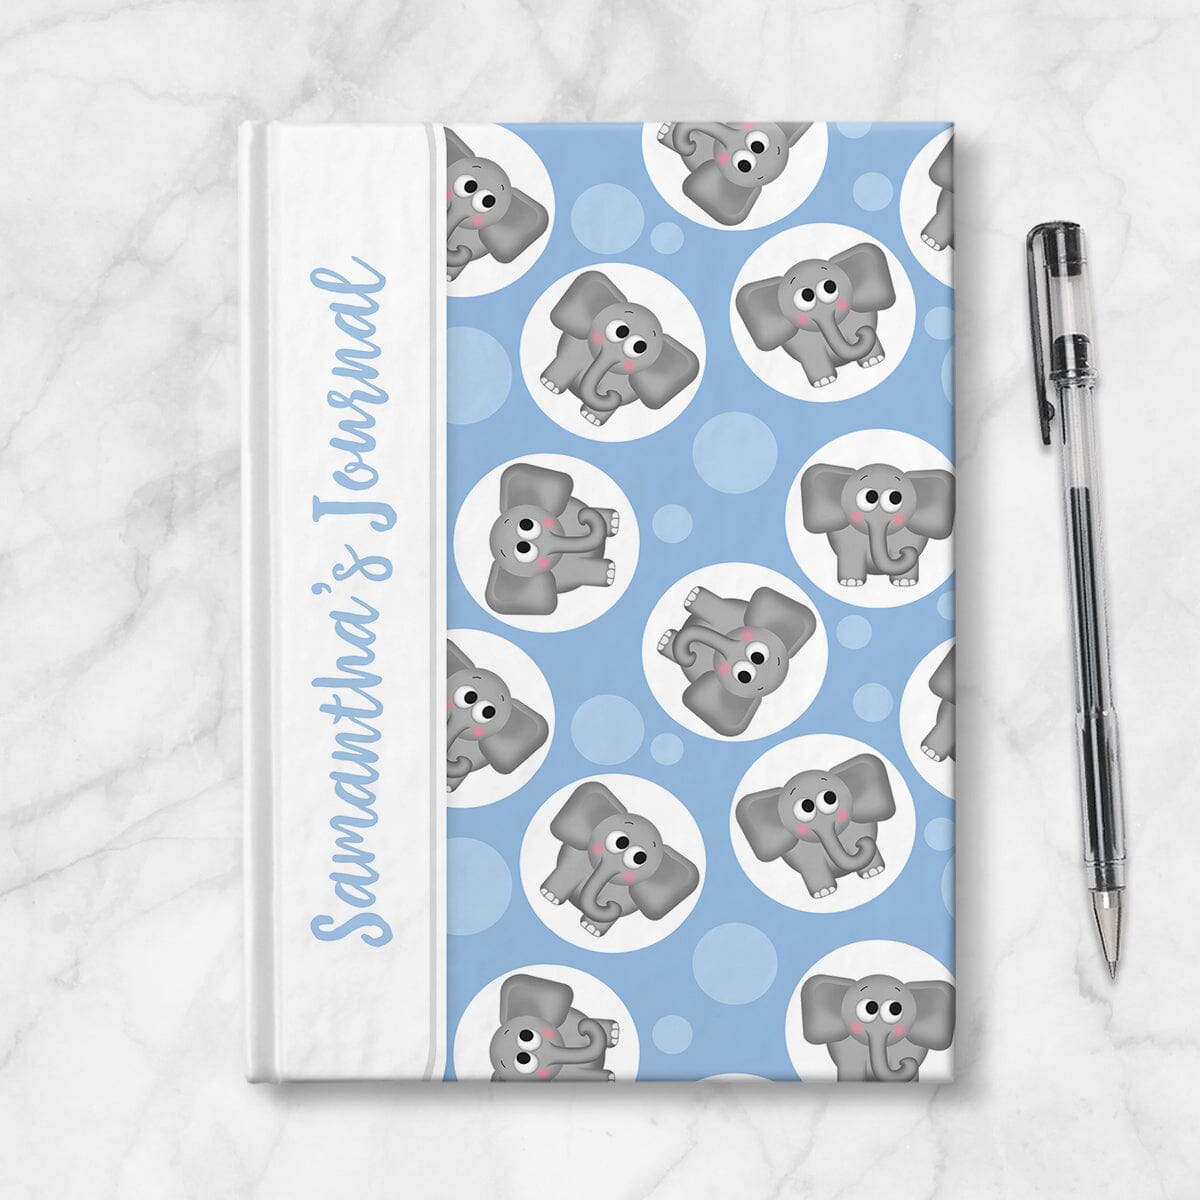 Personalized Cute Blue Elephant Journal at Artistically Invited. Image shows the book on a countertop next to a pen.